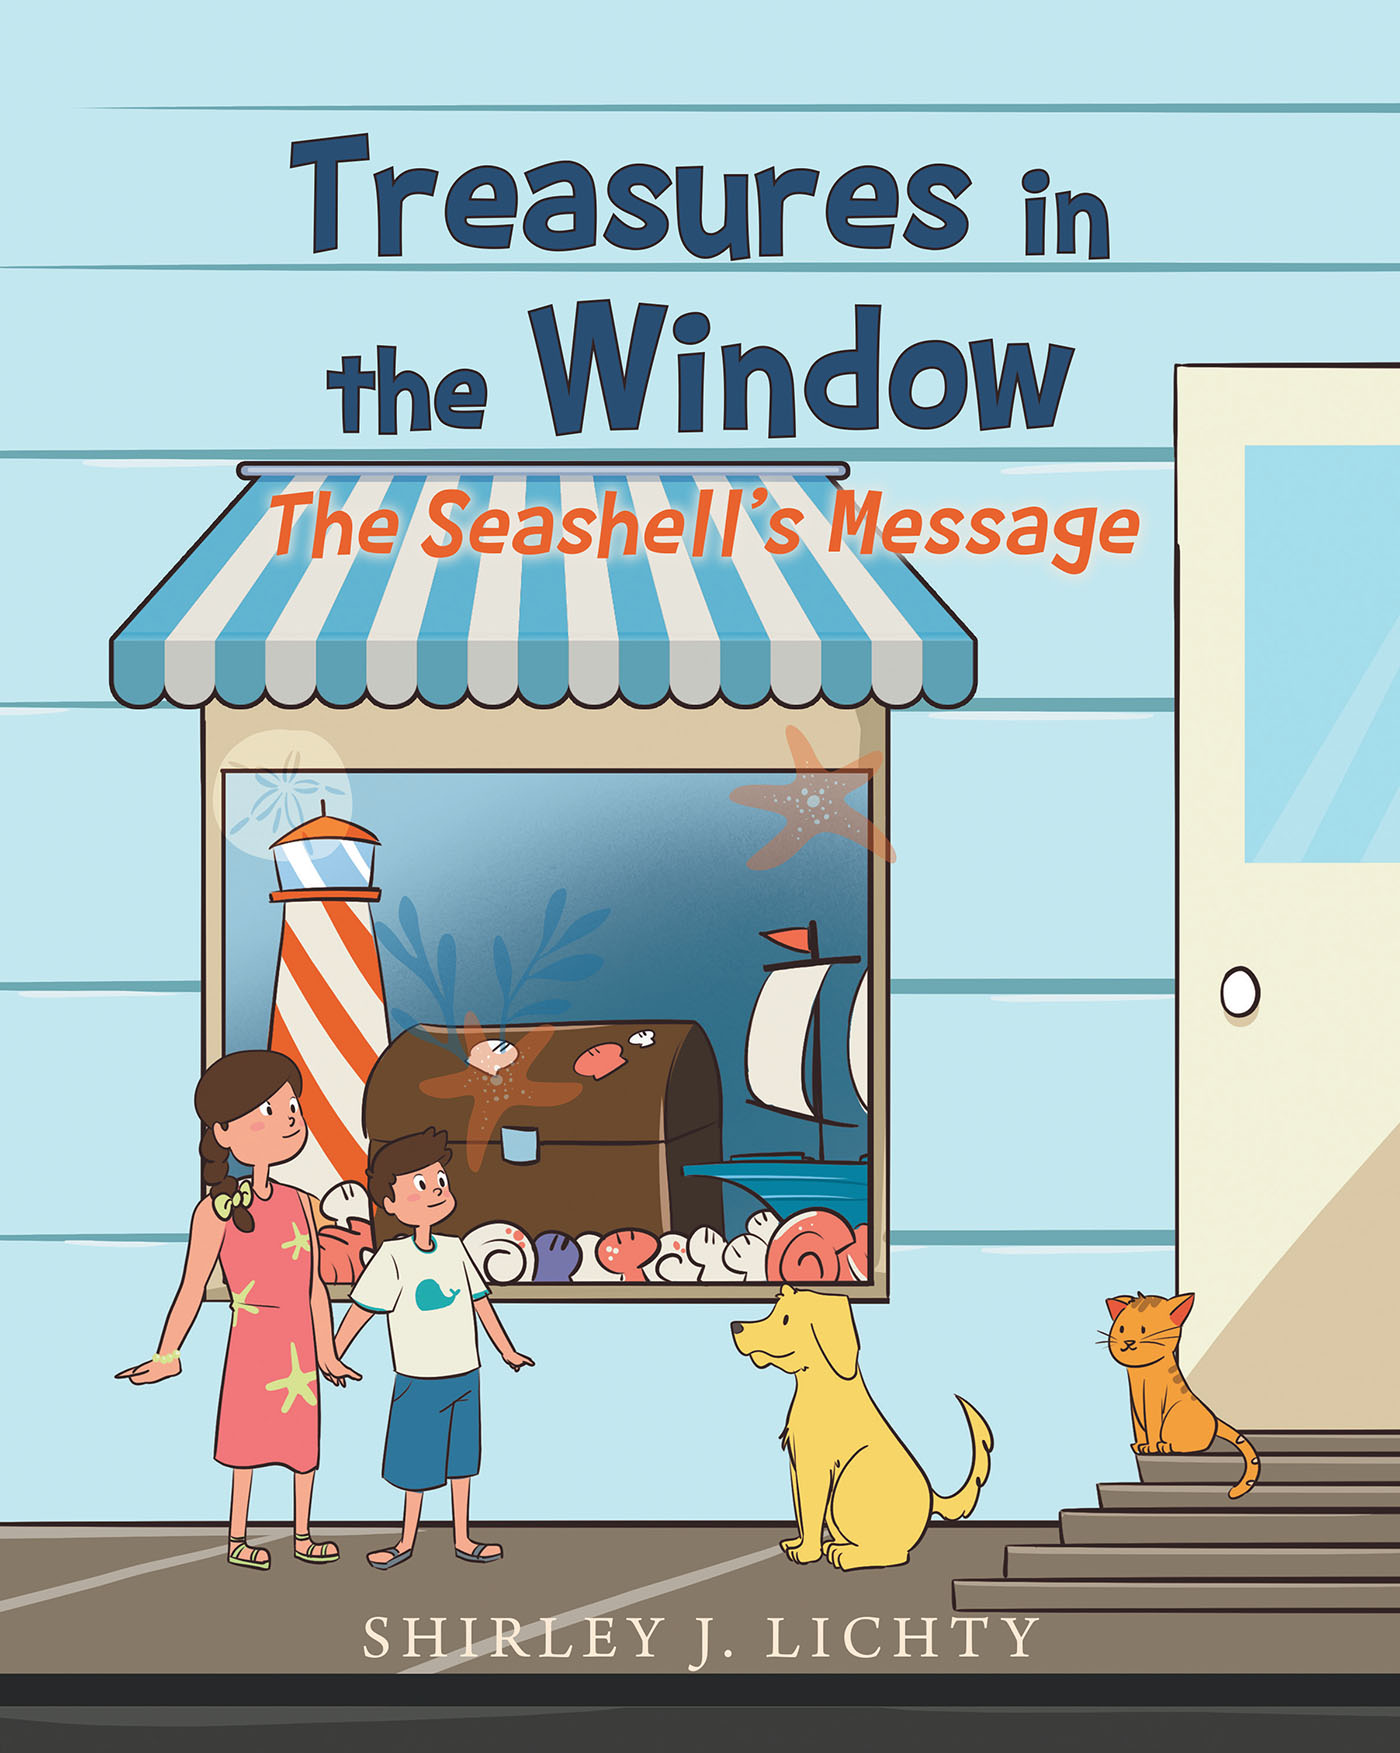 Shirley J. Lichty’s Newly Released “Treasures in the Window: The Seashell’s Message” is an Island Adventure That Offers Unexpected Treasures and Important Life Lessons